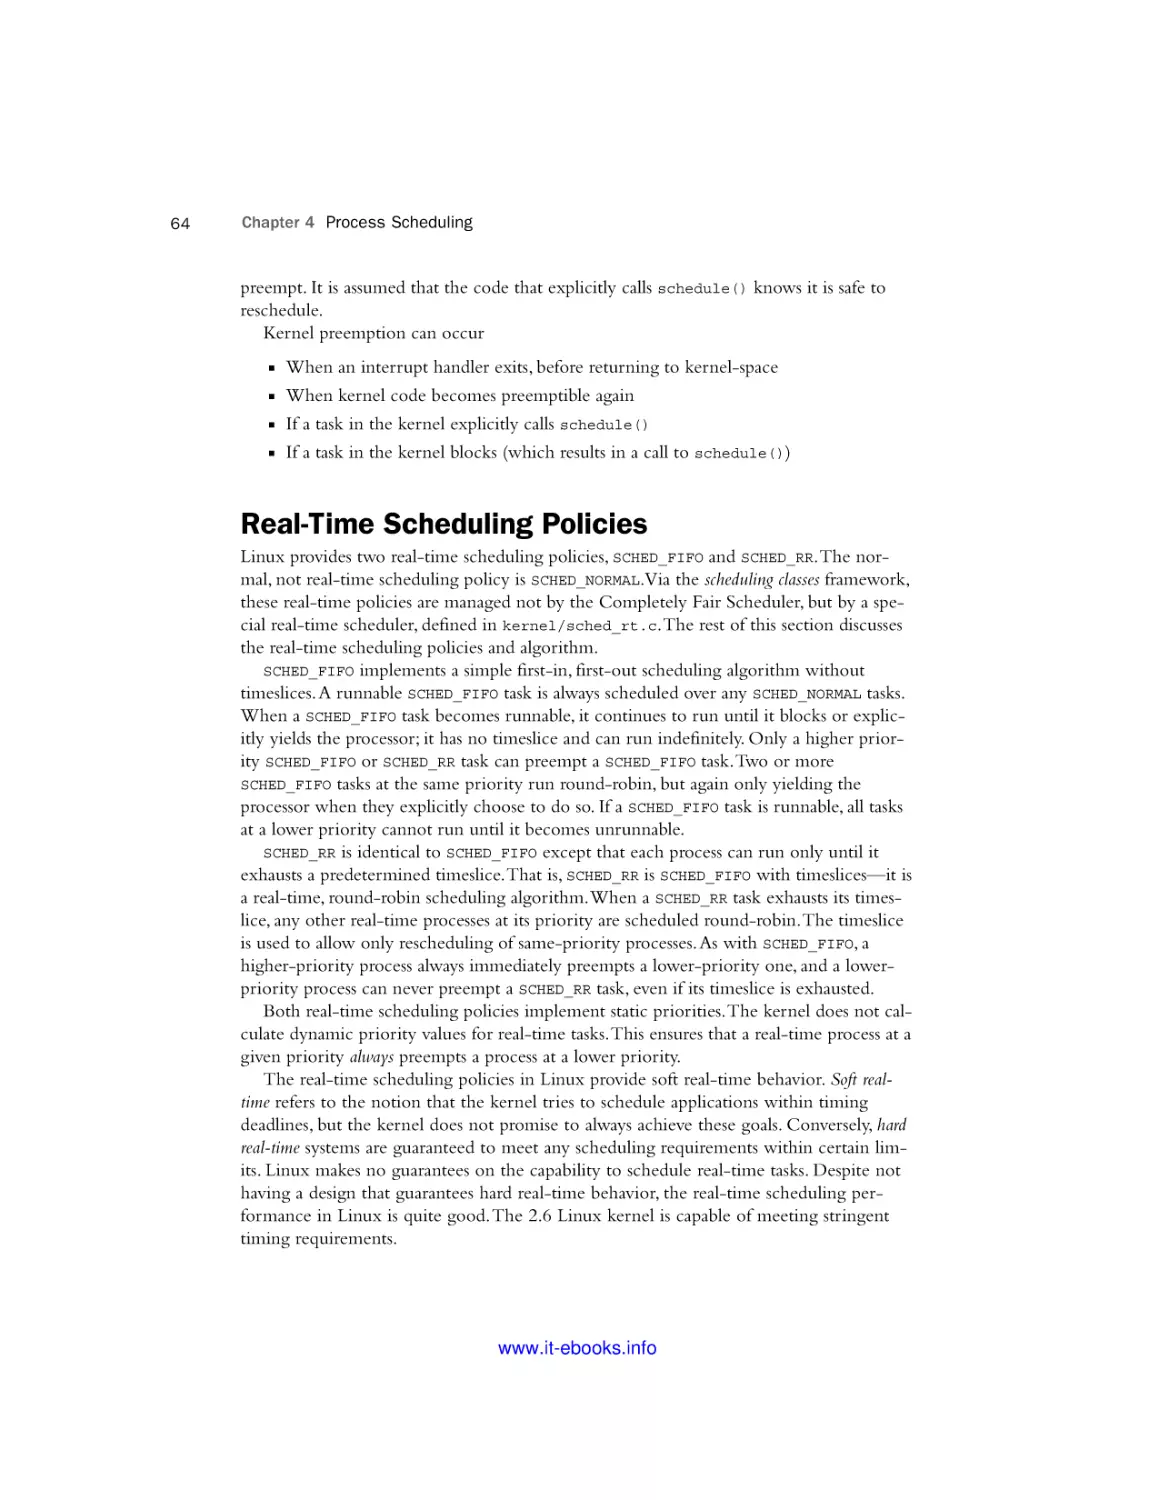 Real-Time Scheduling Policies